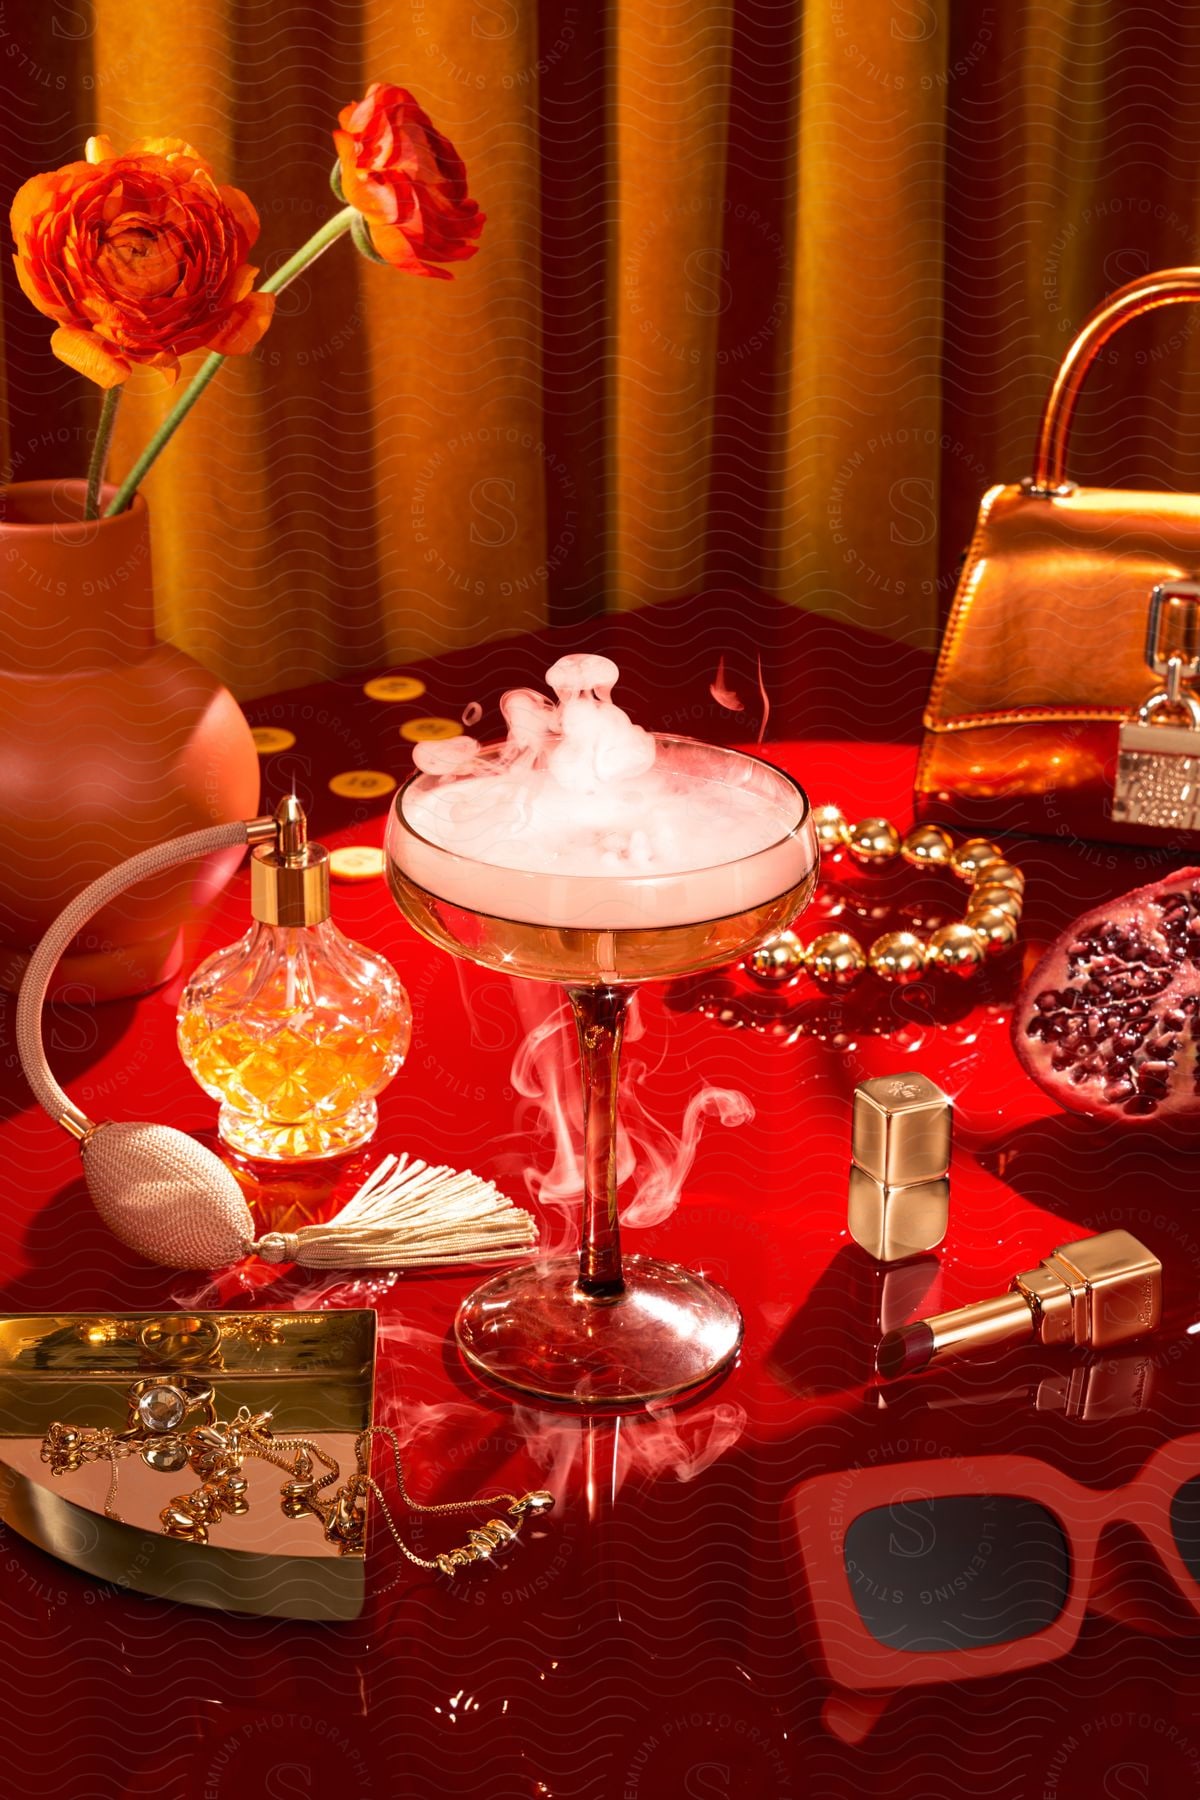 Table with beauty products and a drink in a crystal glass on a red table.